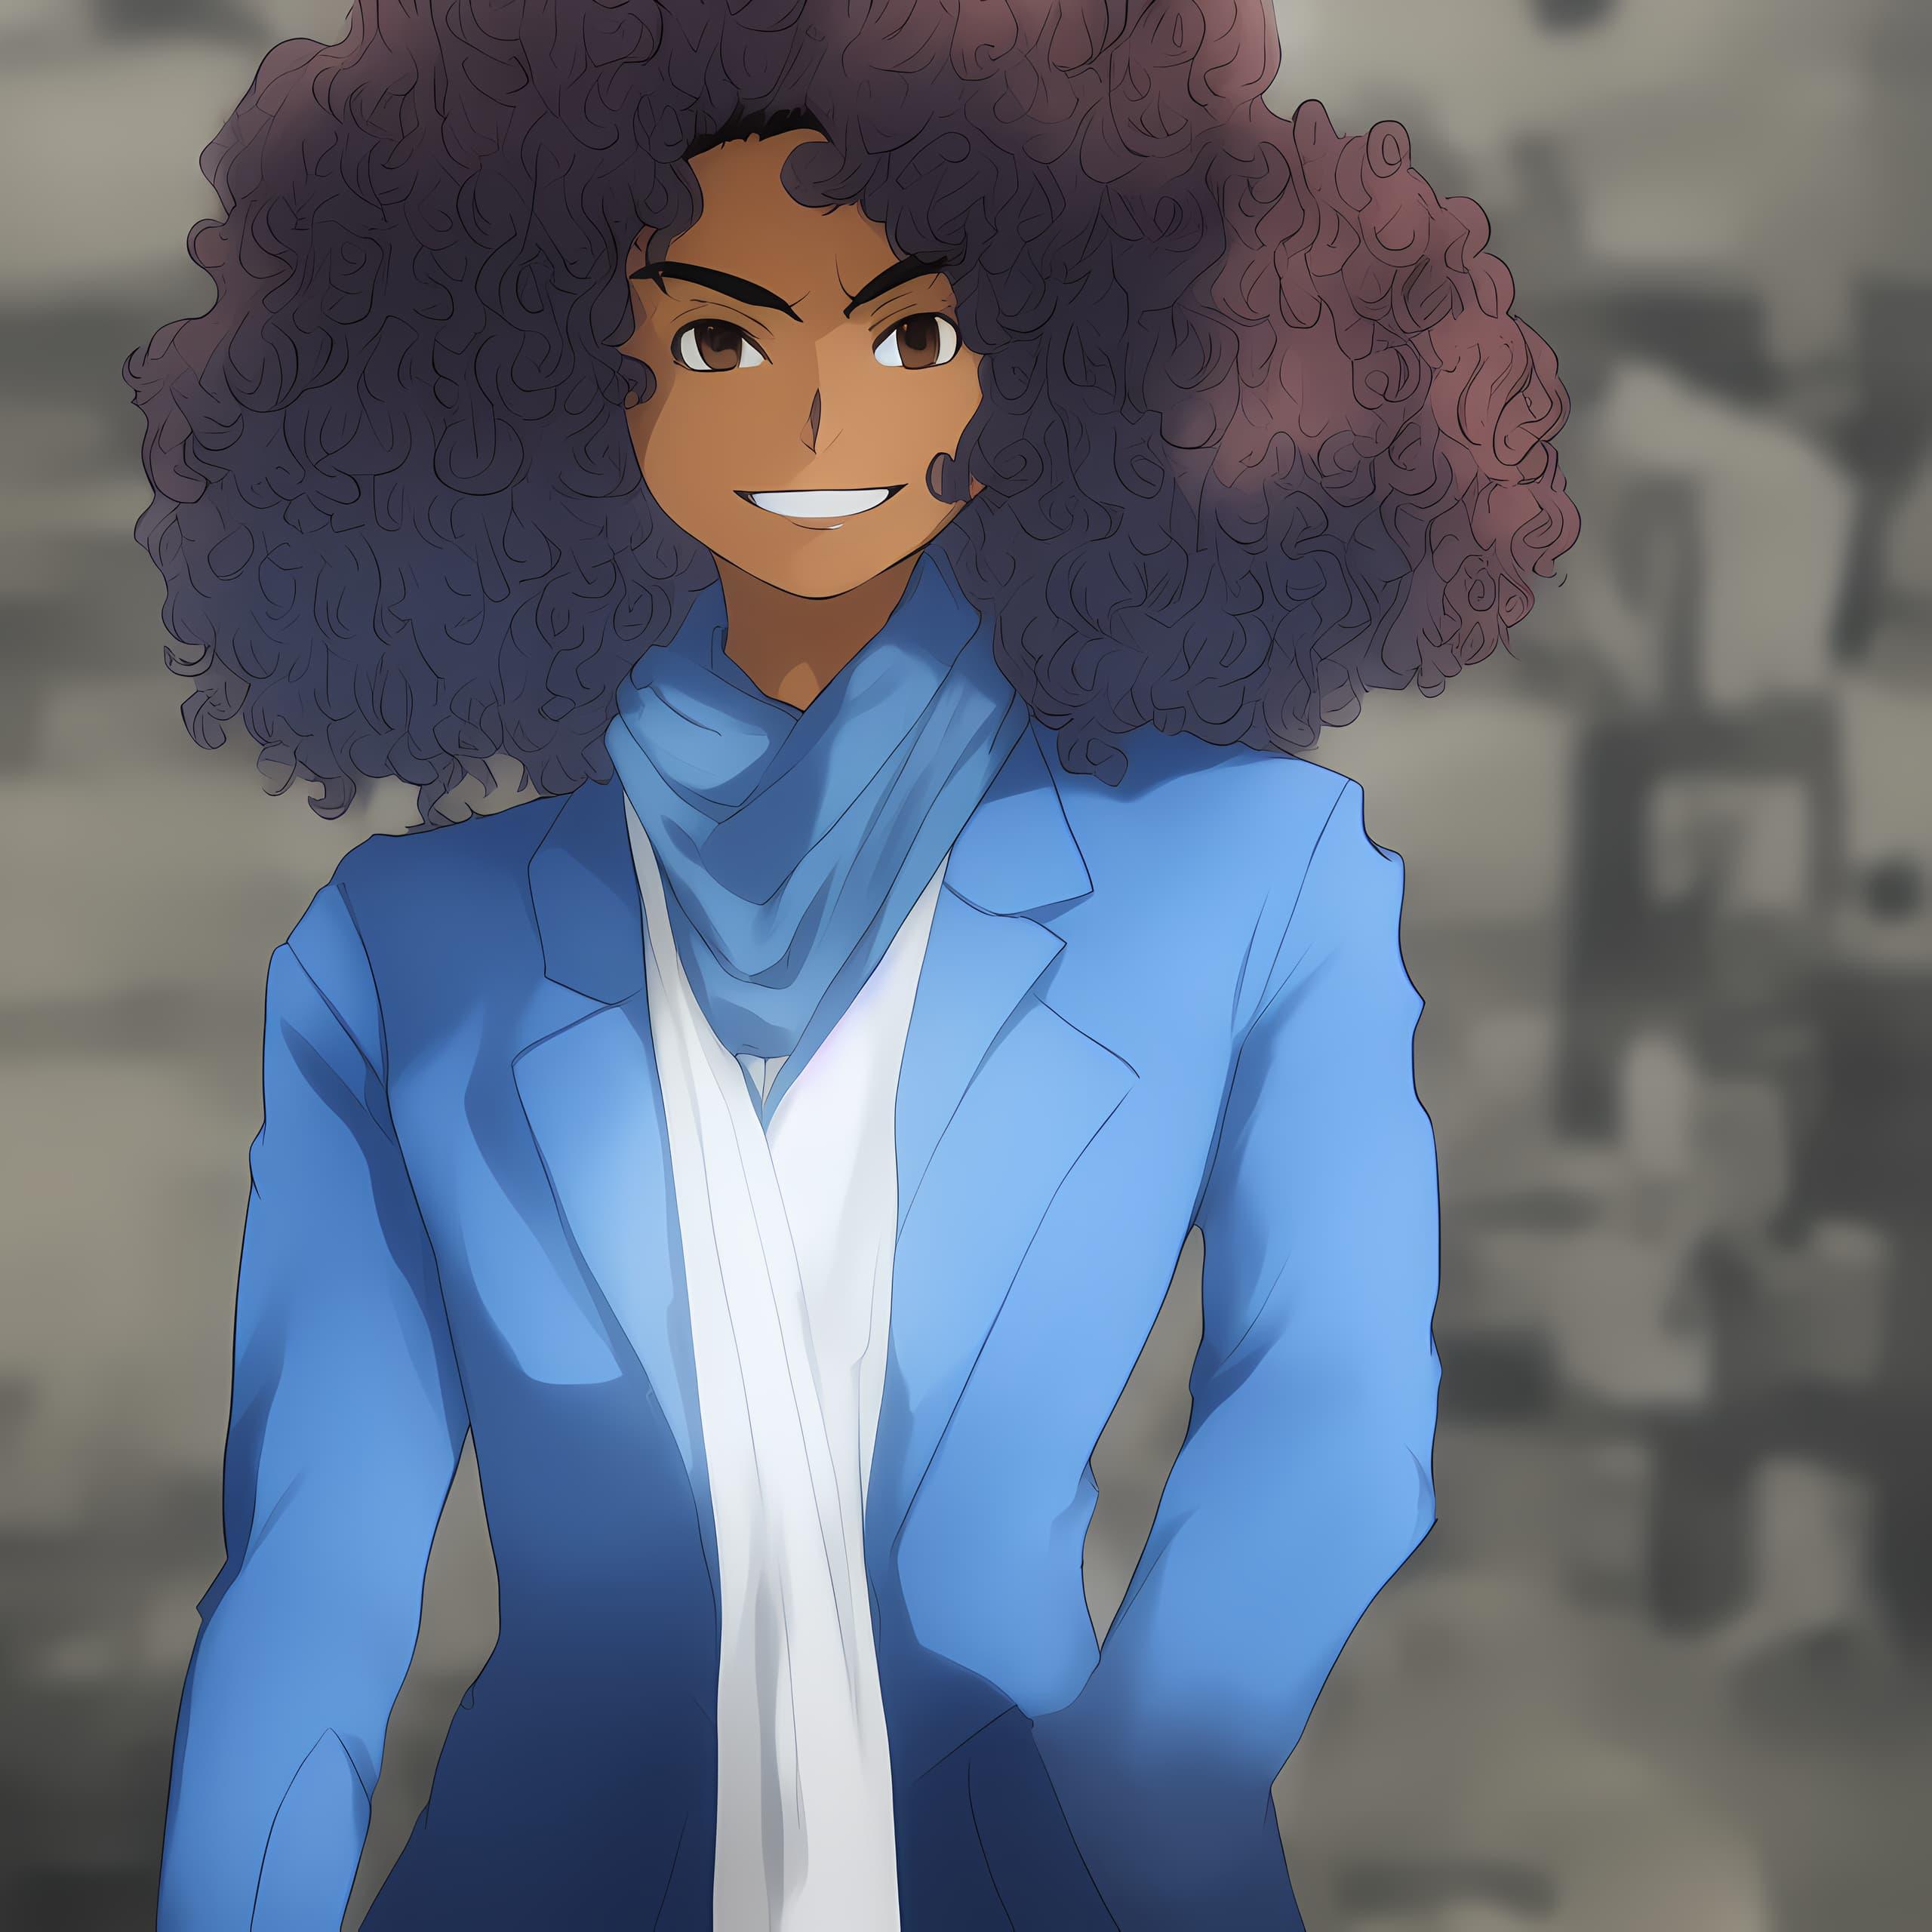 An anime-style illustration of a woman with a large brown afro and a blue and white suit and scarf